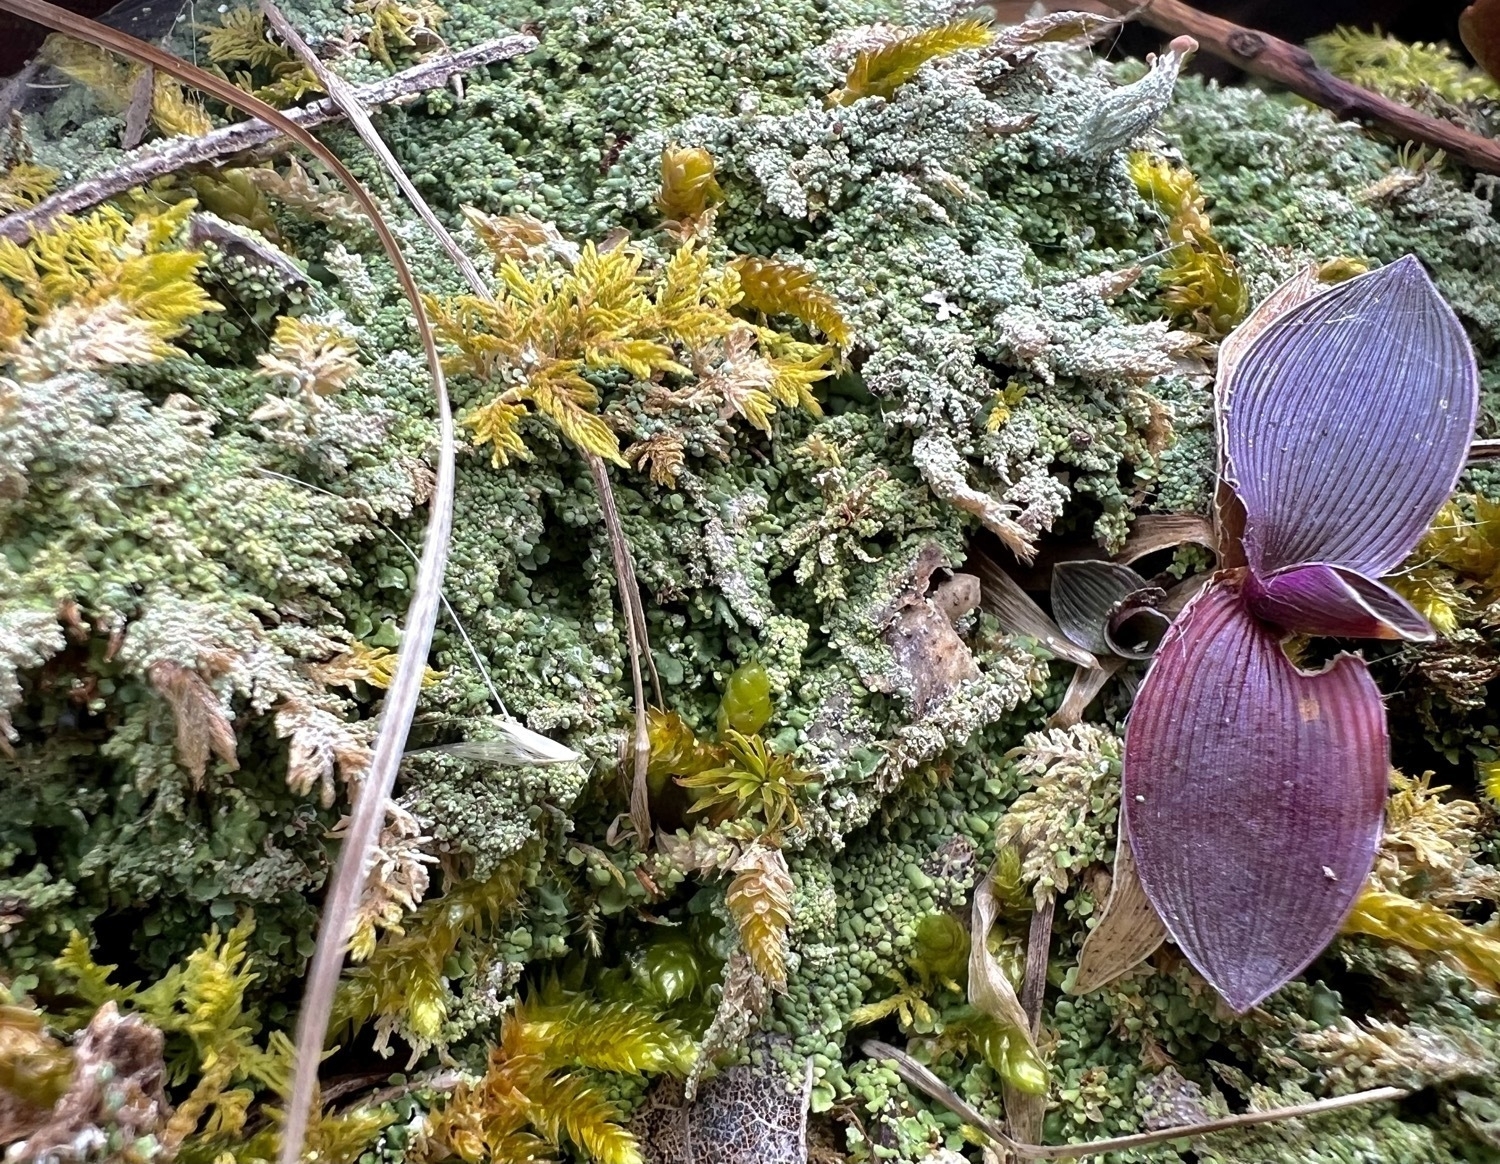 A patch of moss and lichen. A small purplish leaved plant is growing in the bottom right corner.